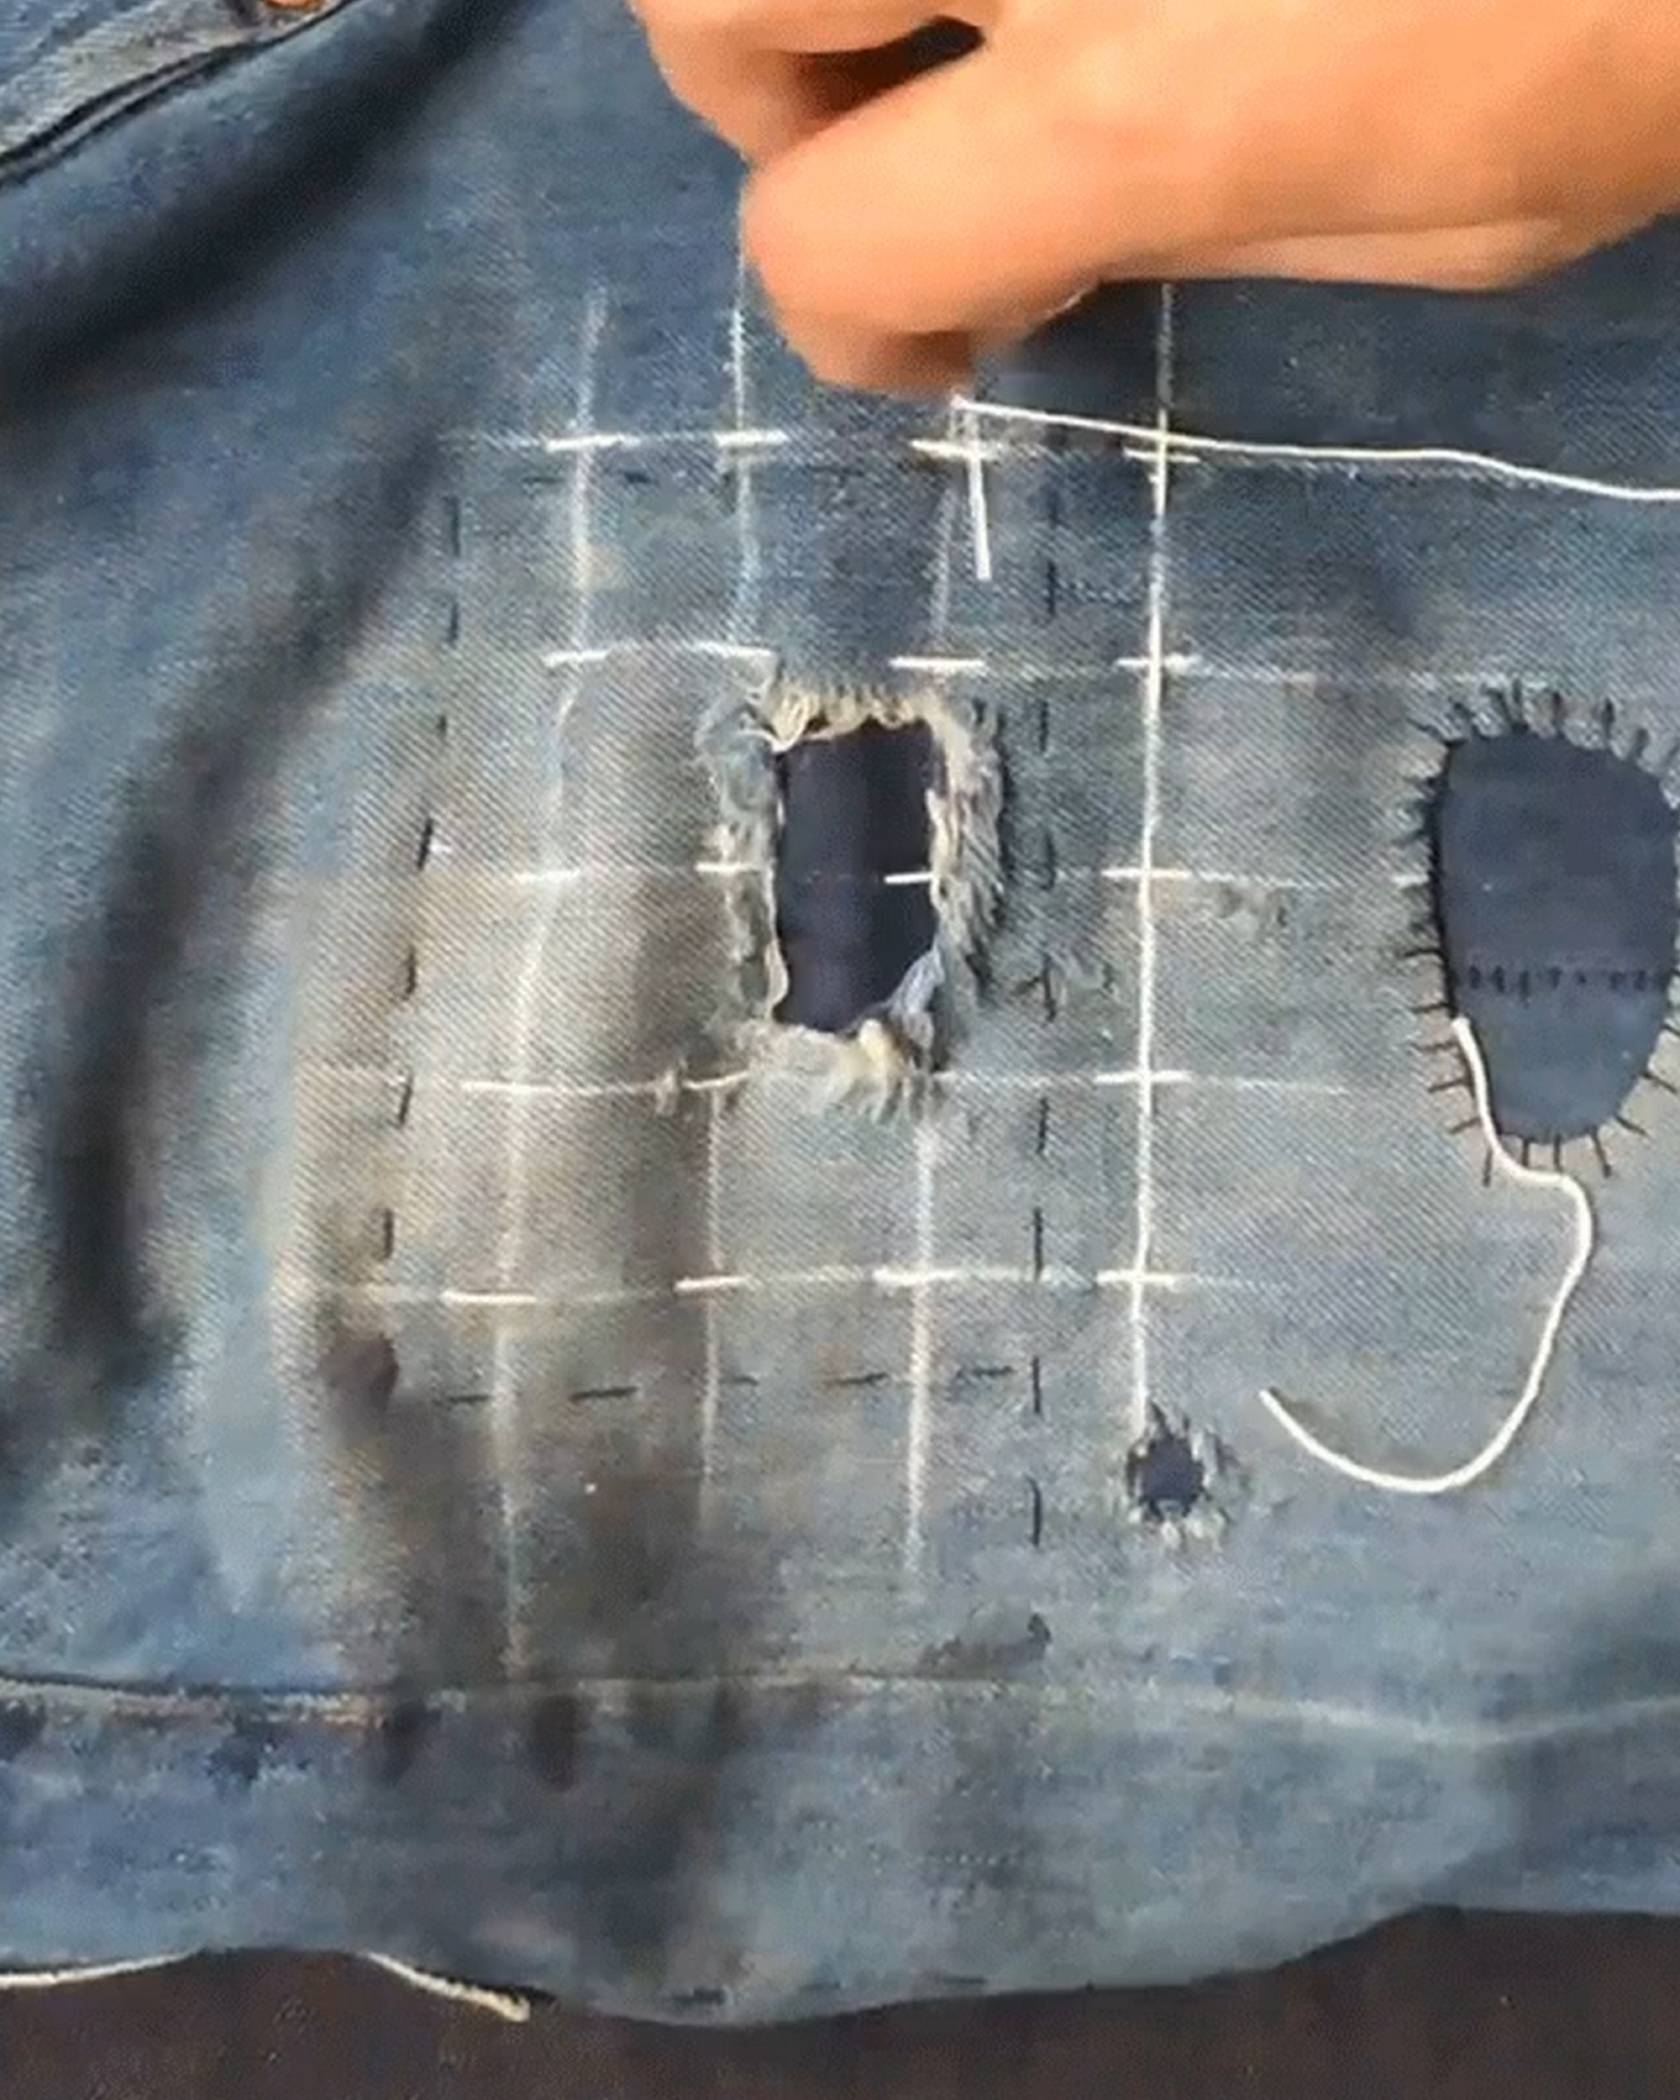 How To Fix A Hole Or Tear In Jeans